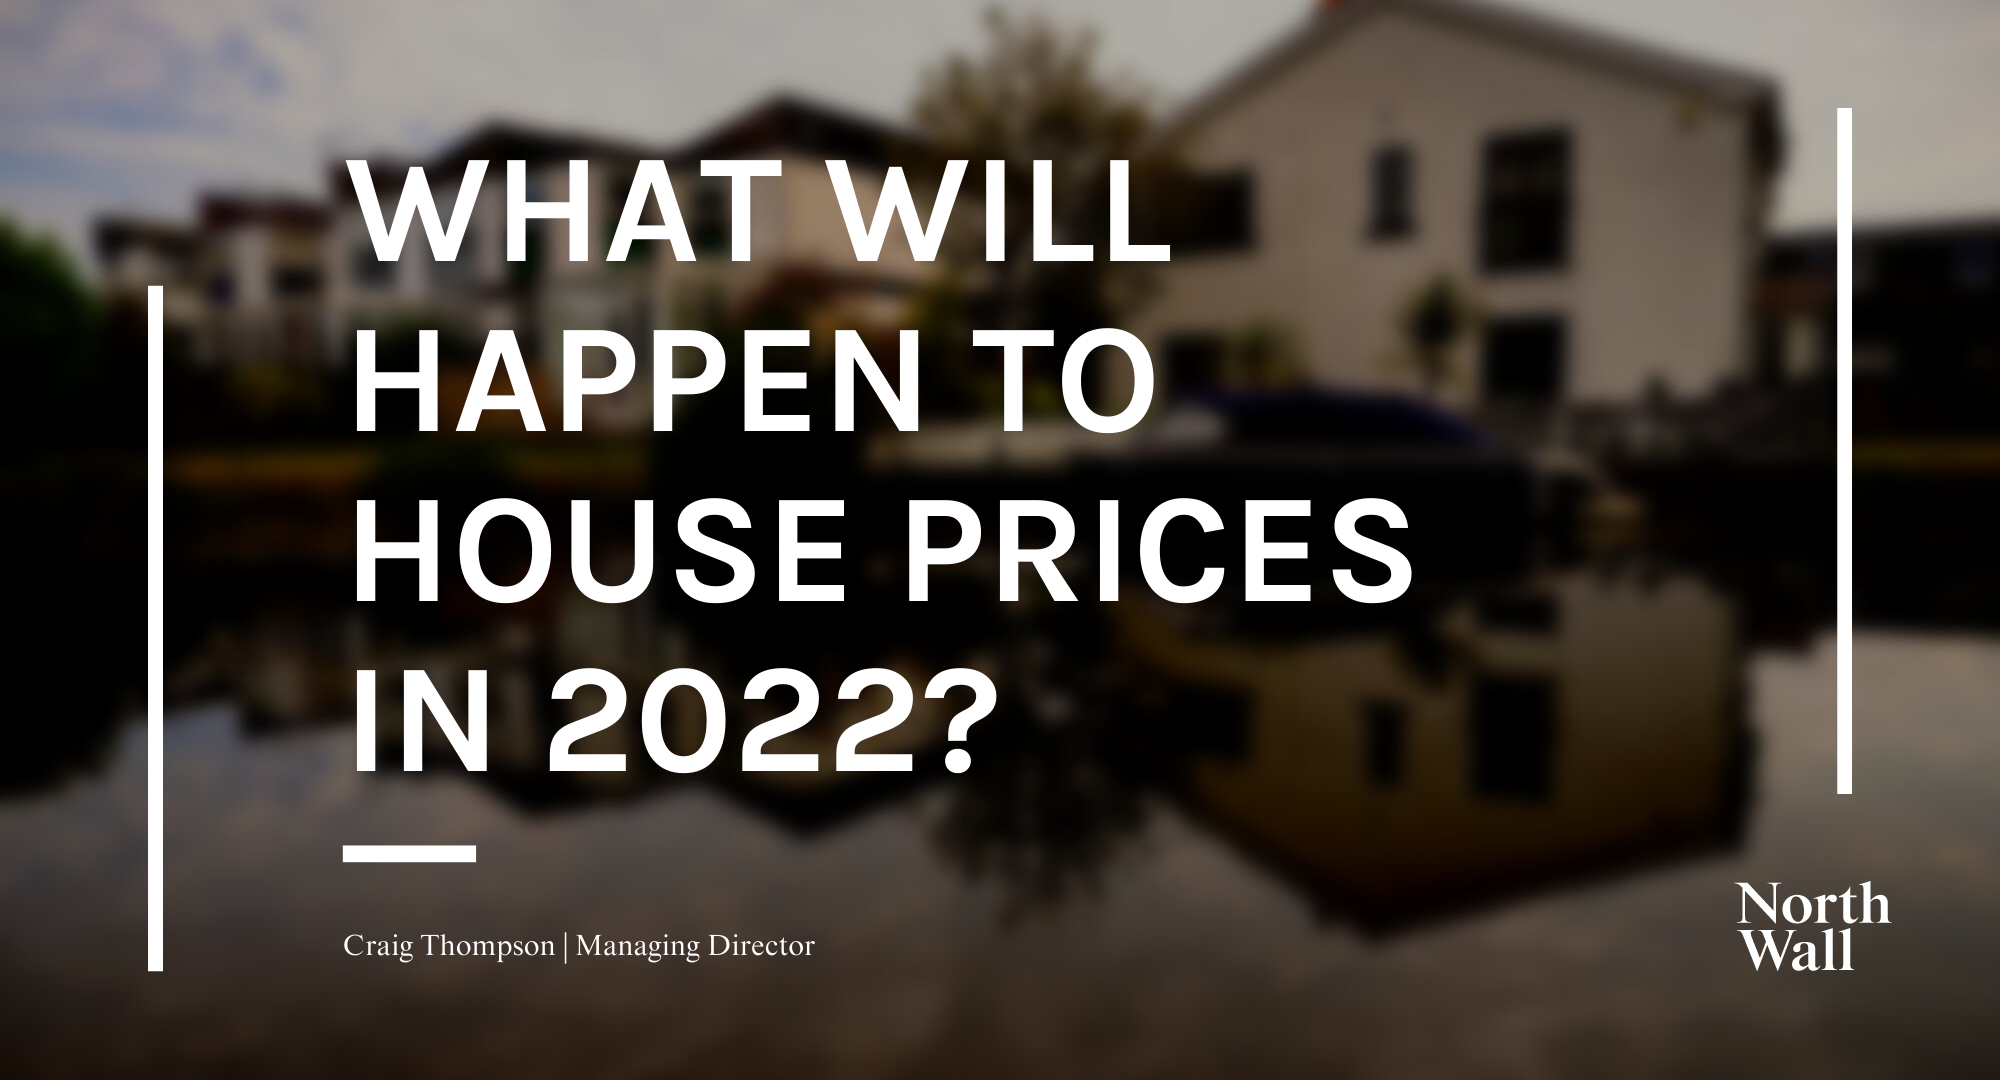 What will happen to house prices in Maghull?